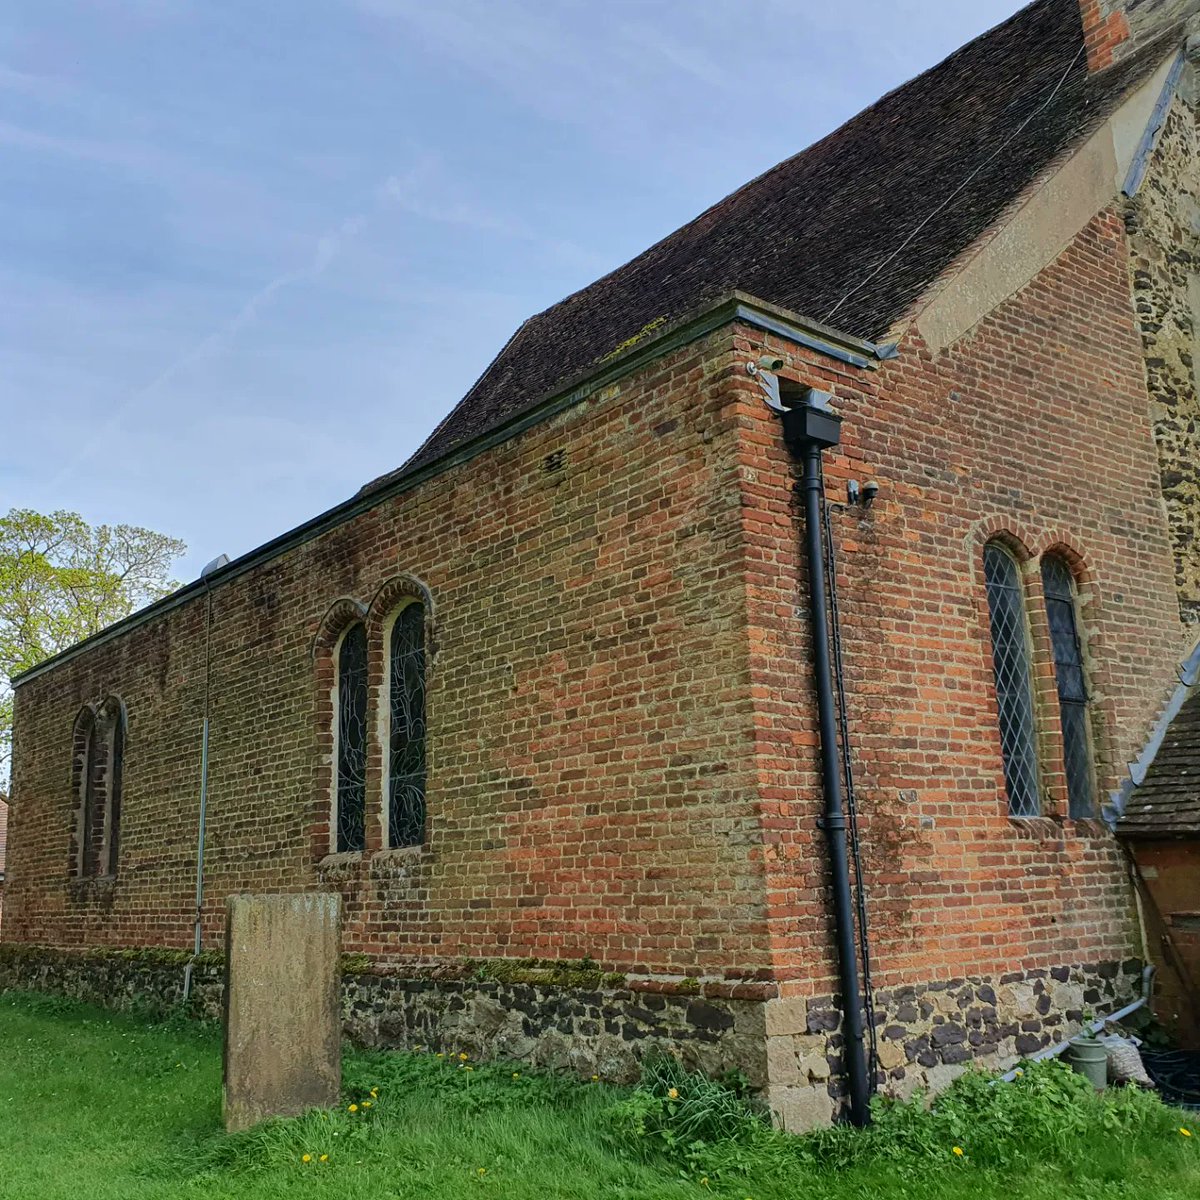 Surviving Jacobean box pews in the 17th century brick extension of St Peter's, Igtham.